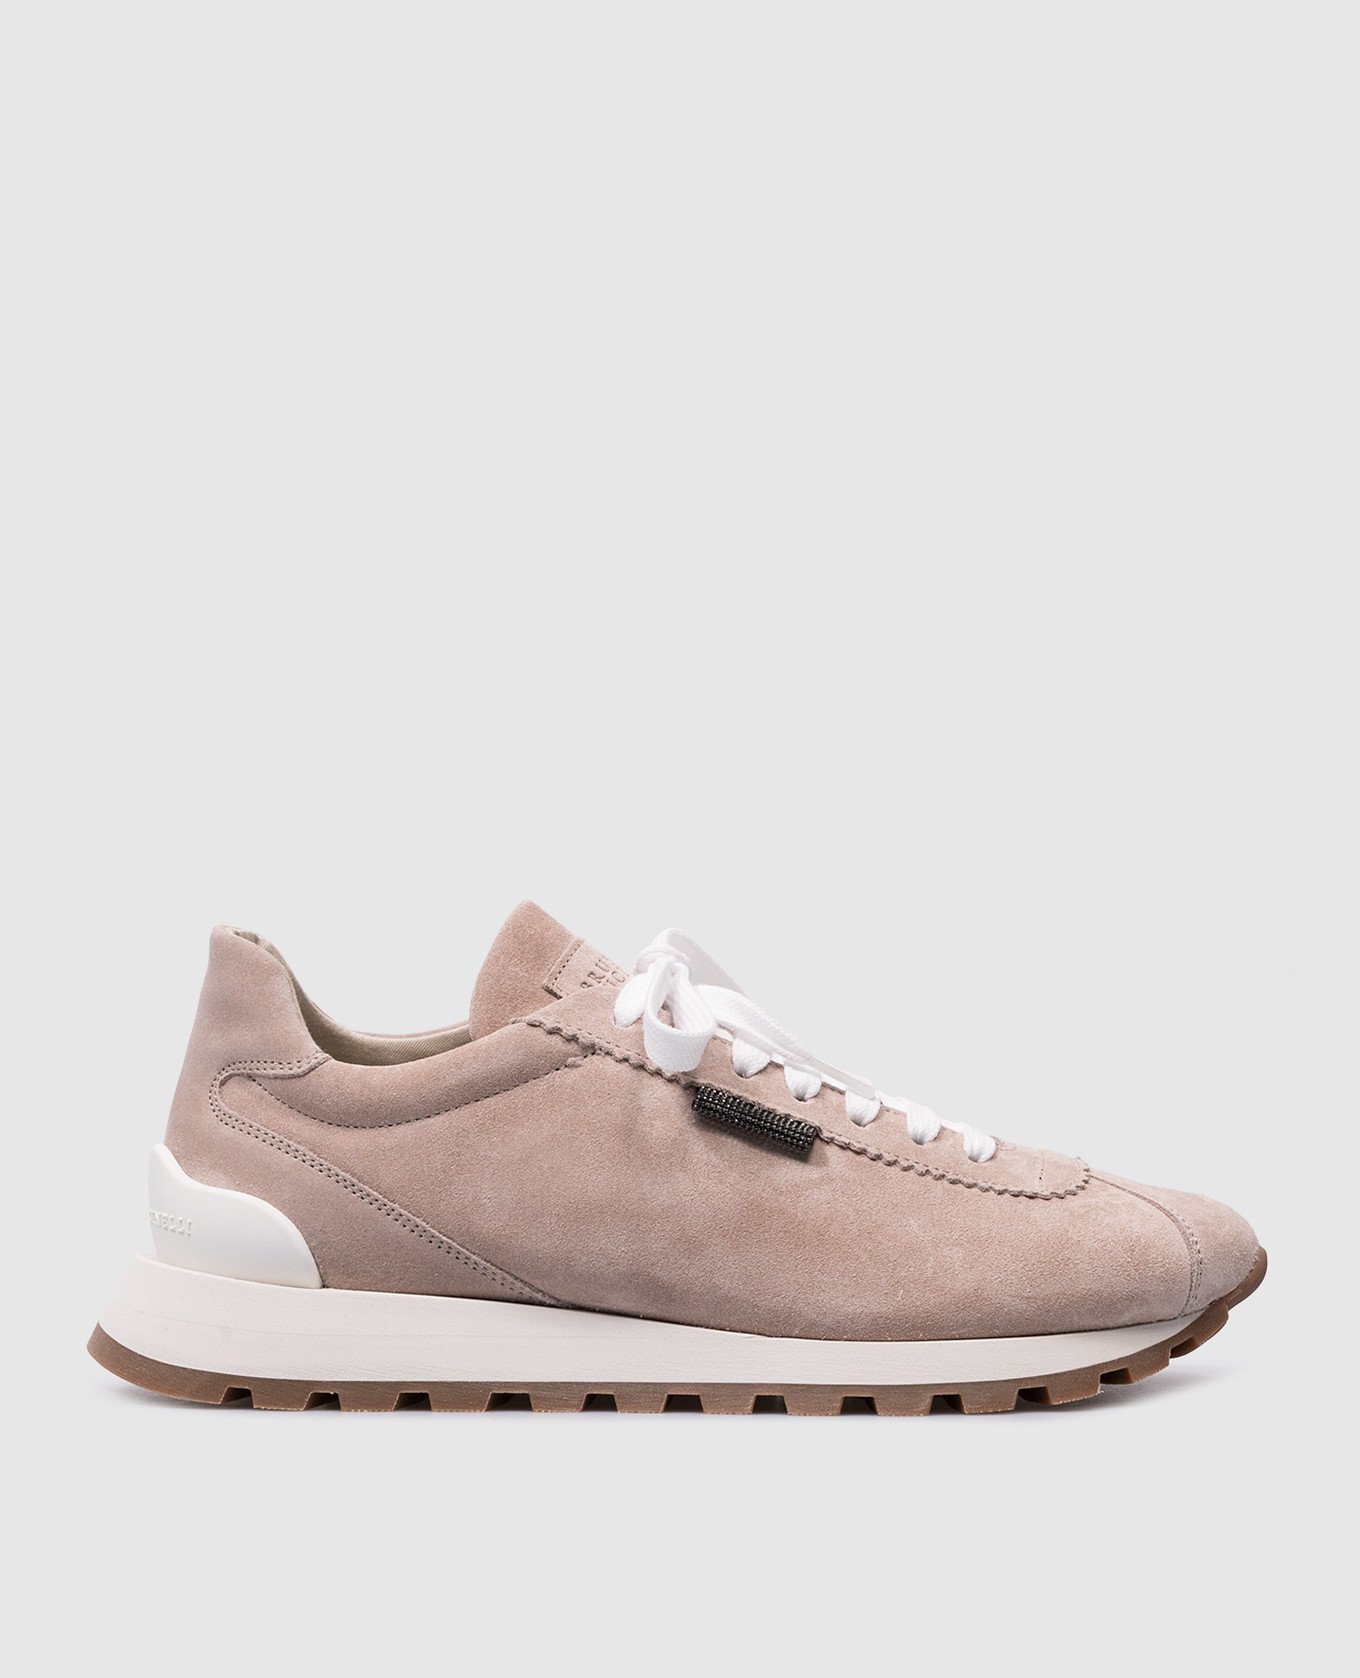 Beige suede sneakers with monil chain